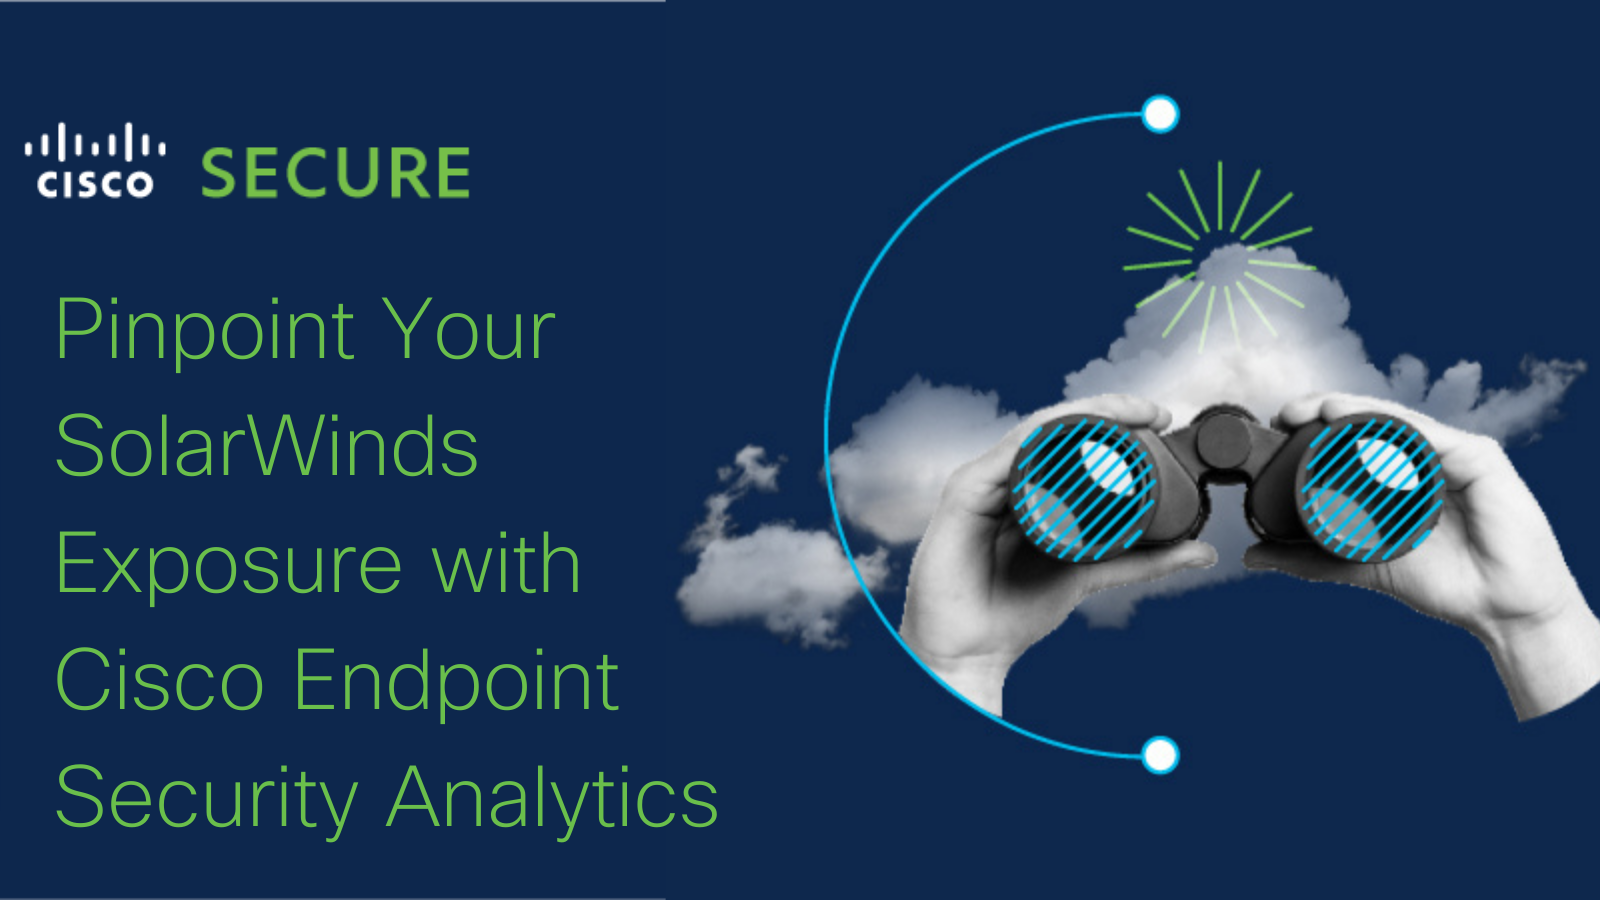 Pinpoint Your SolarWinds Exposure with Cisco Endpoint Security Analytics